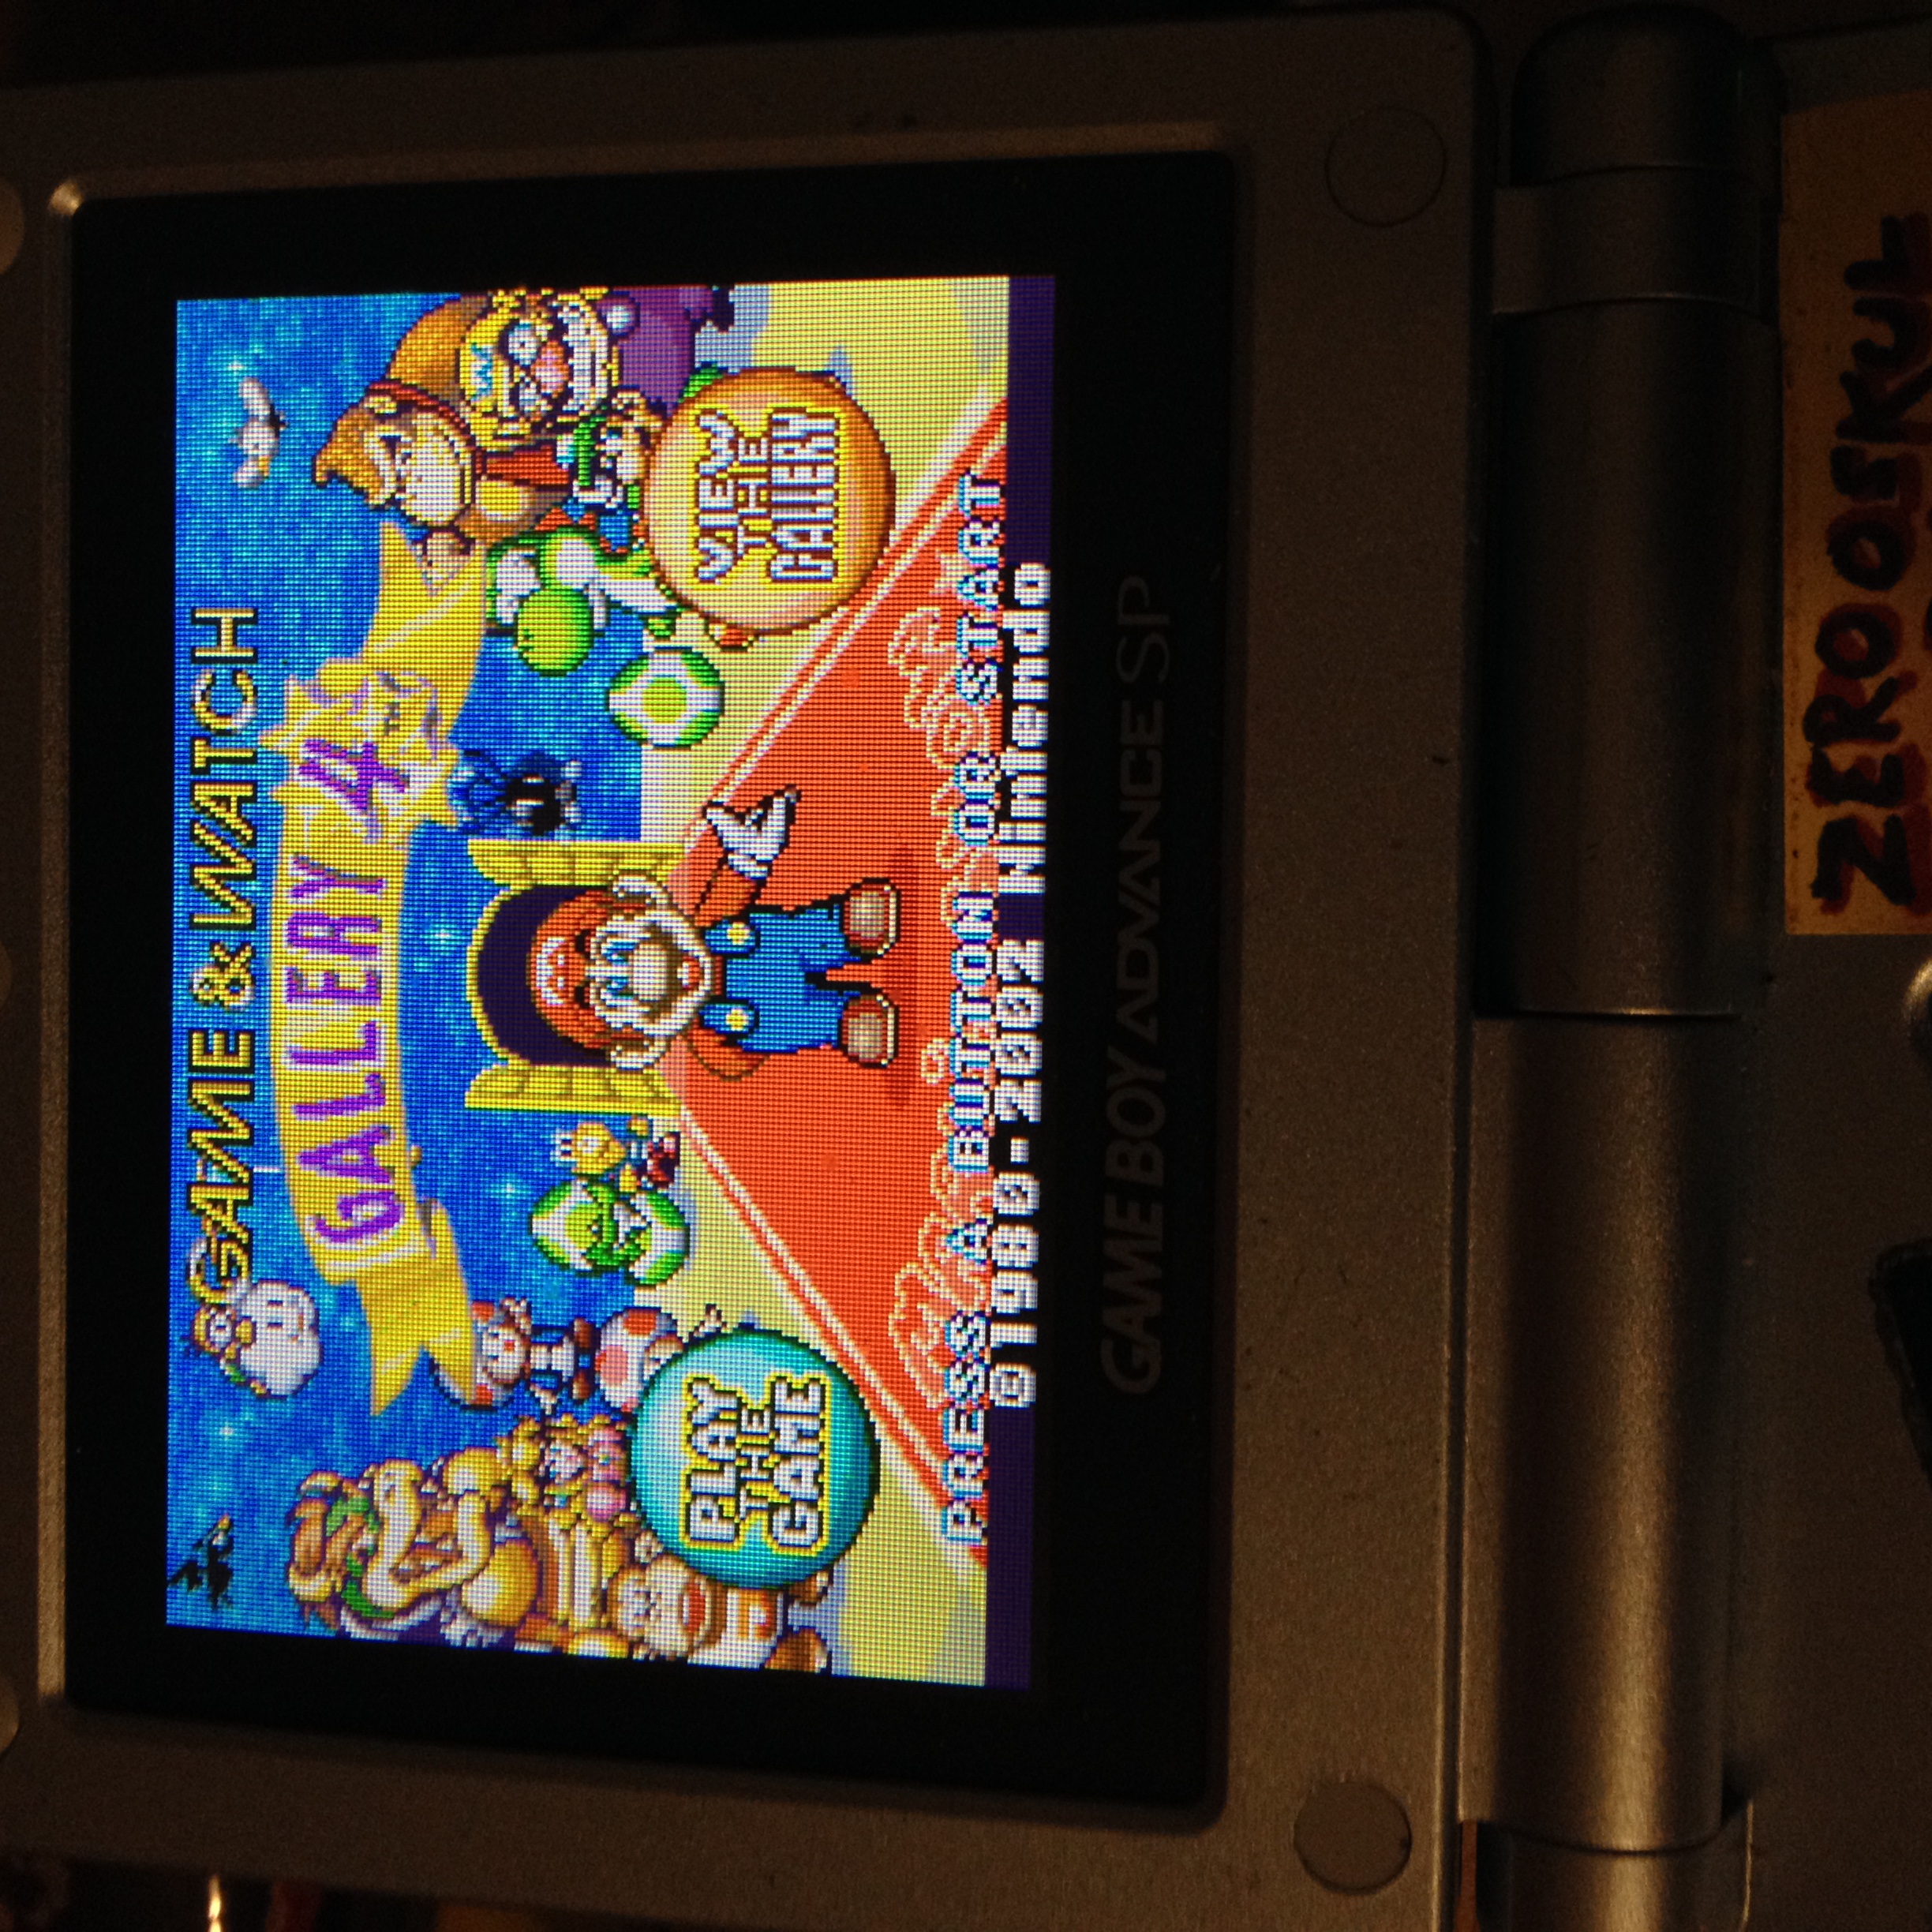 Game & Watch Gallery 4 [# Of Stars Earned] 160 points